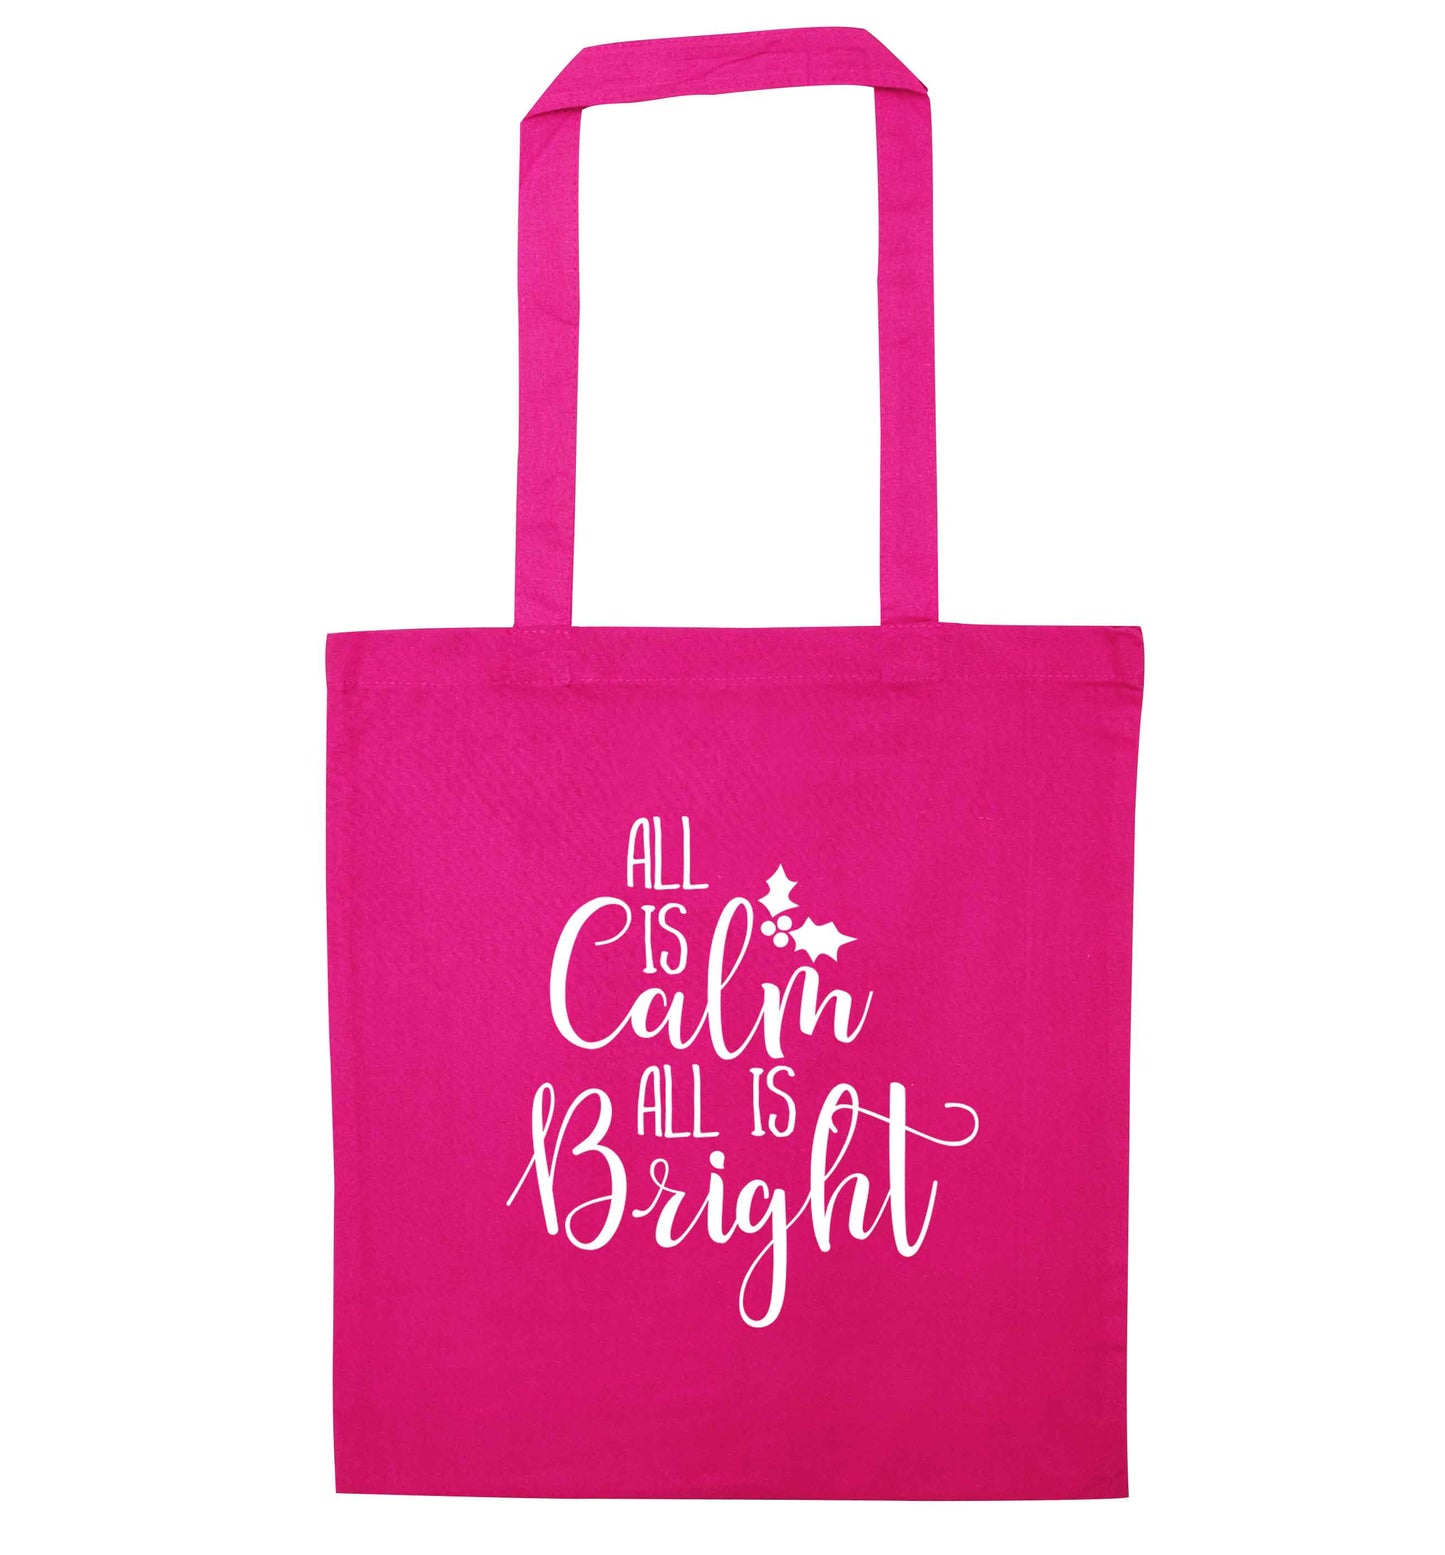 All is calm is bright pink tote bag